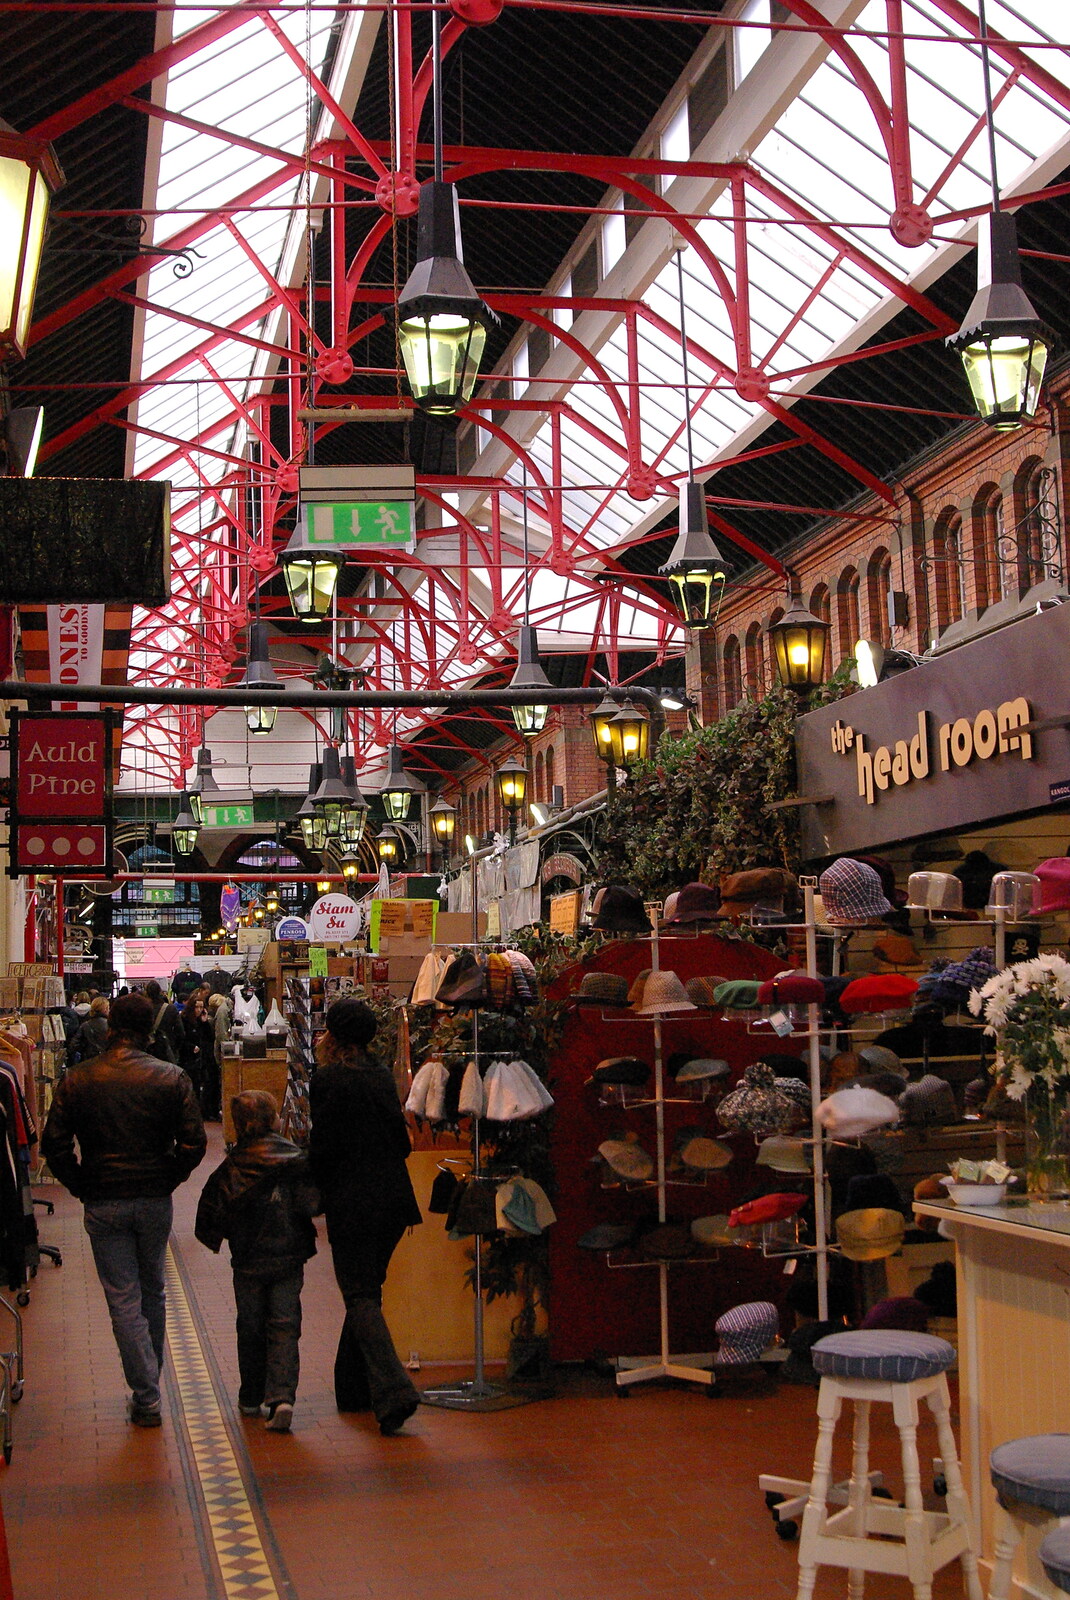 Easter in Dublin, Ireland - 21st March 2008: More of the indoor market